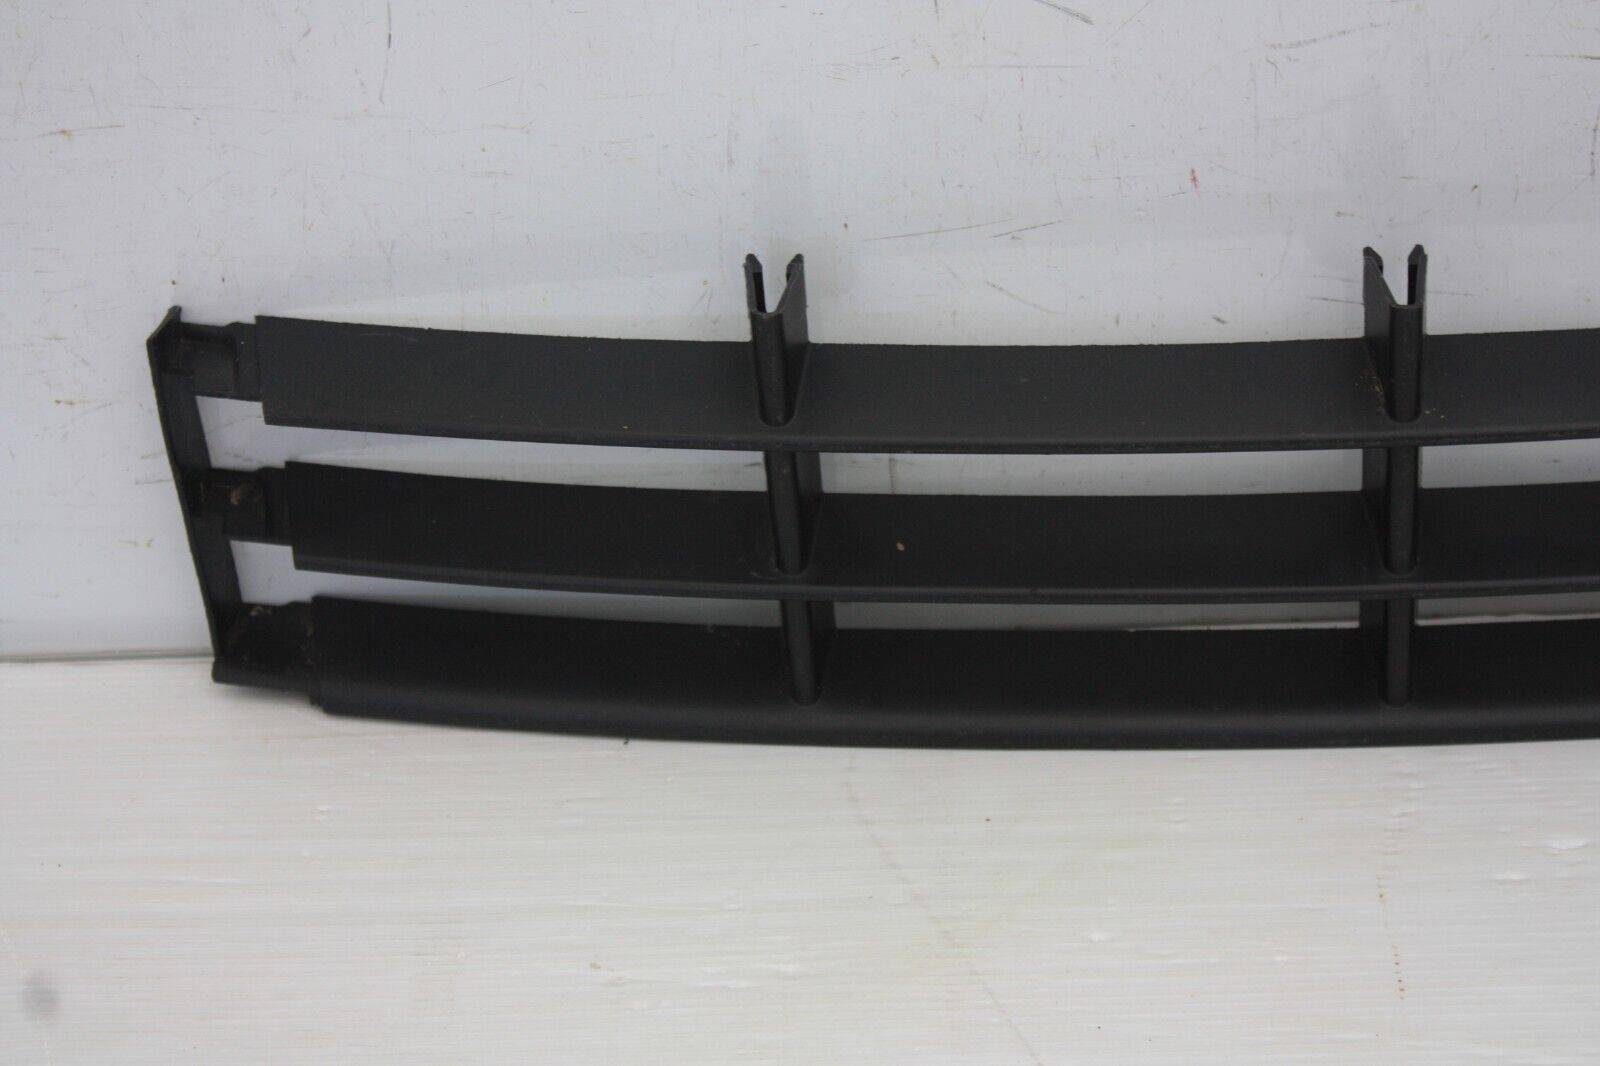 Skoda-Fabia-Roomster-Front-Bumper-Grill-2010-TO-2014-5J0853677A-Genuine-175404663513-2